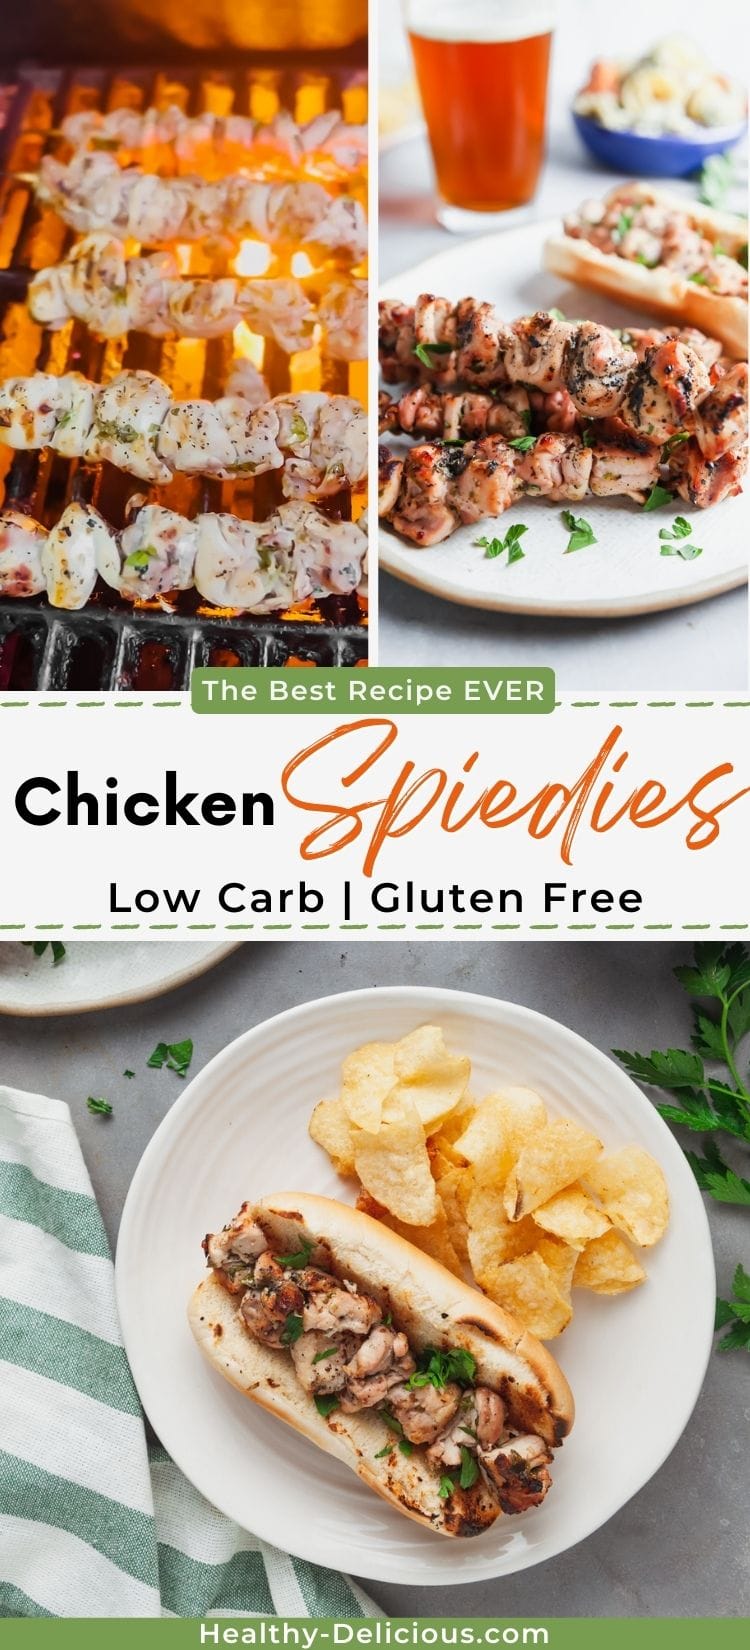 New York style chicken spiedies with homemade marinade full of garlic and lemon, just like at the state fair. Instructions for making these delicious skewers on the grill or inside on the stovetop! via @HealthyDelish